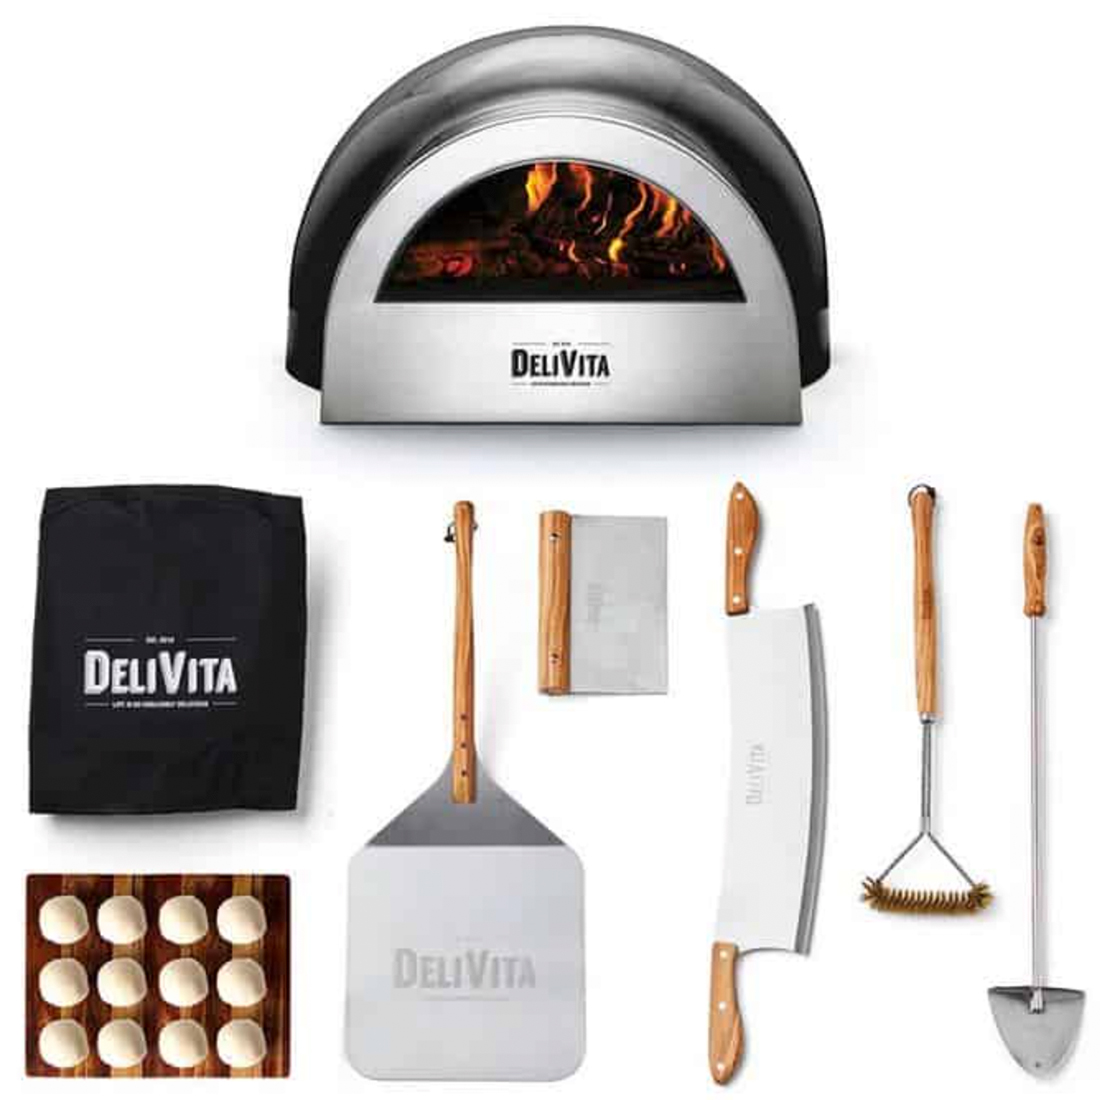 Delivita Pizza Oven Package Cut Out